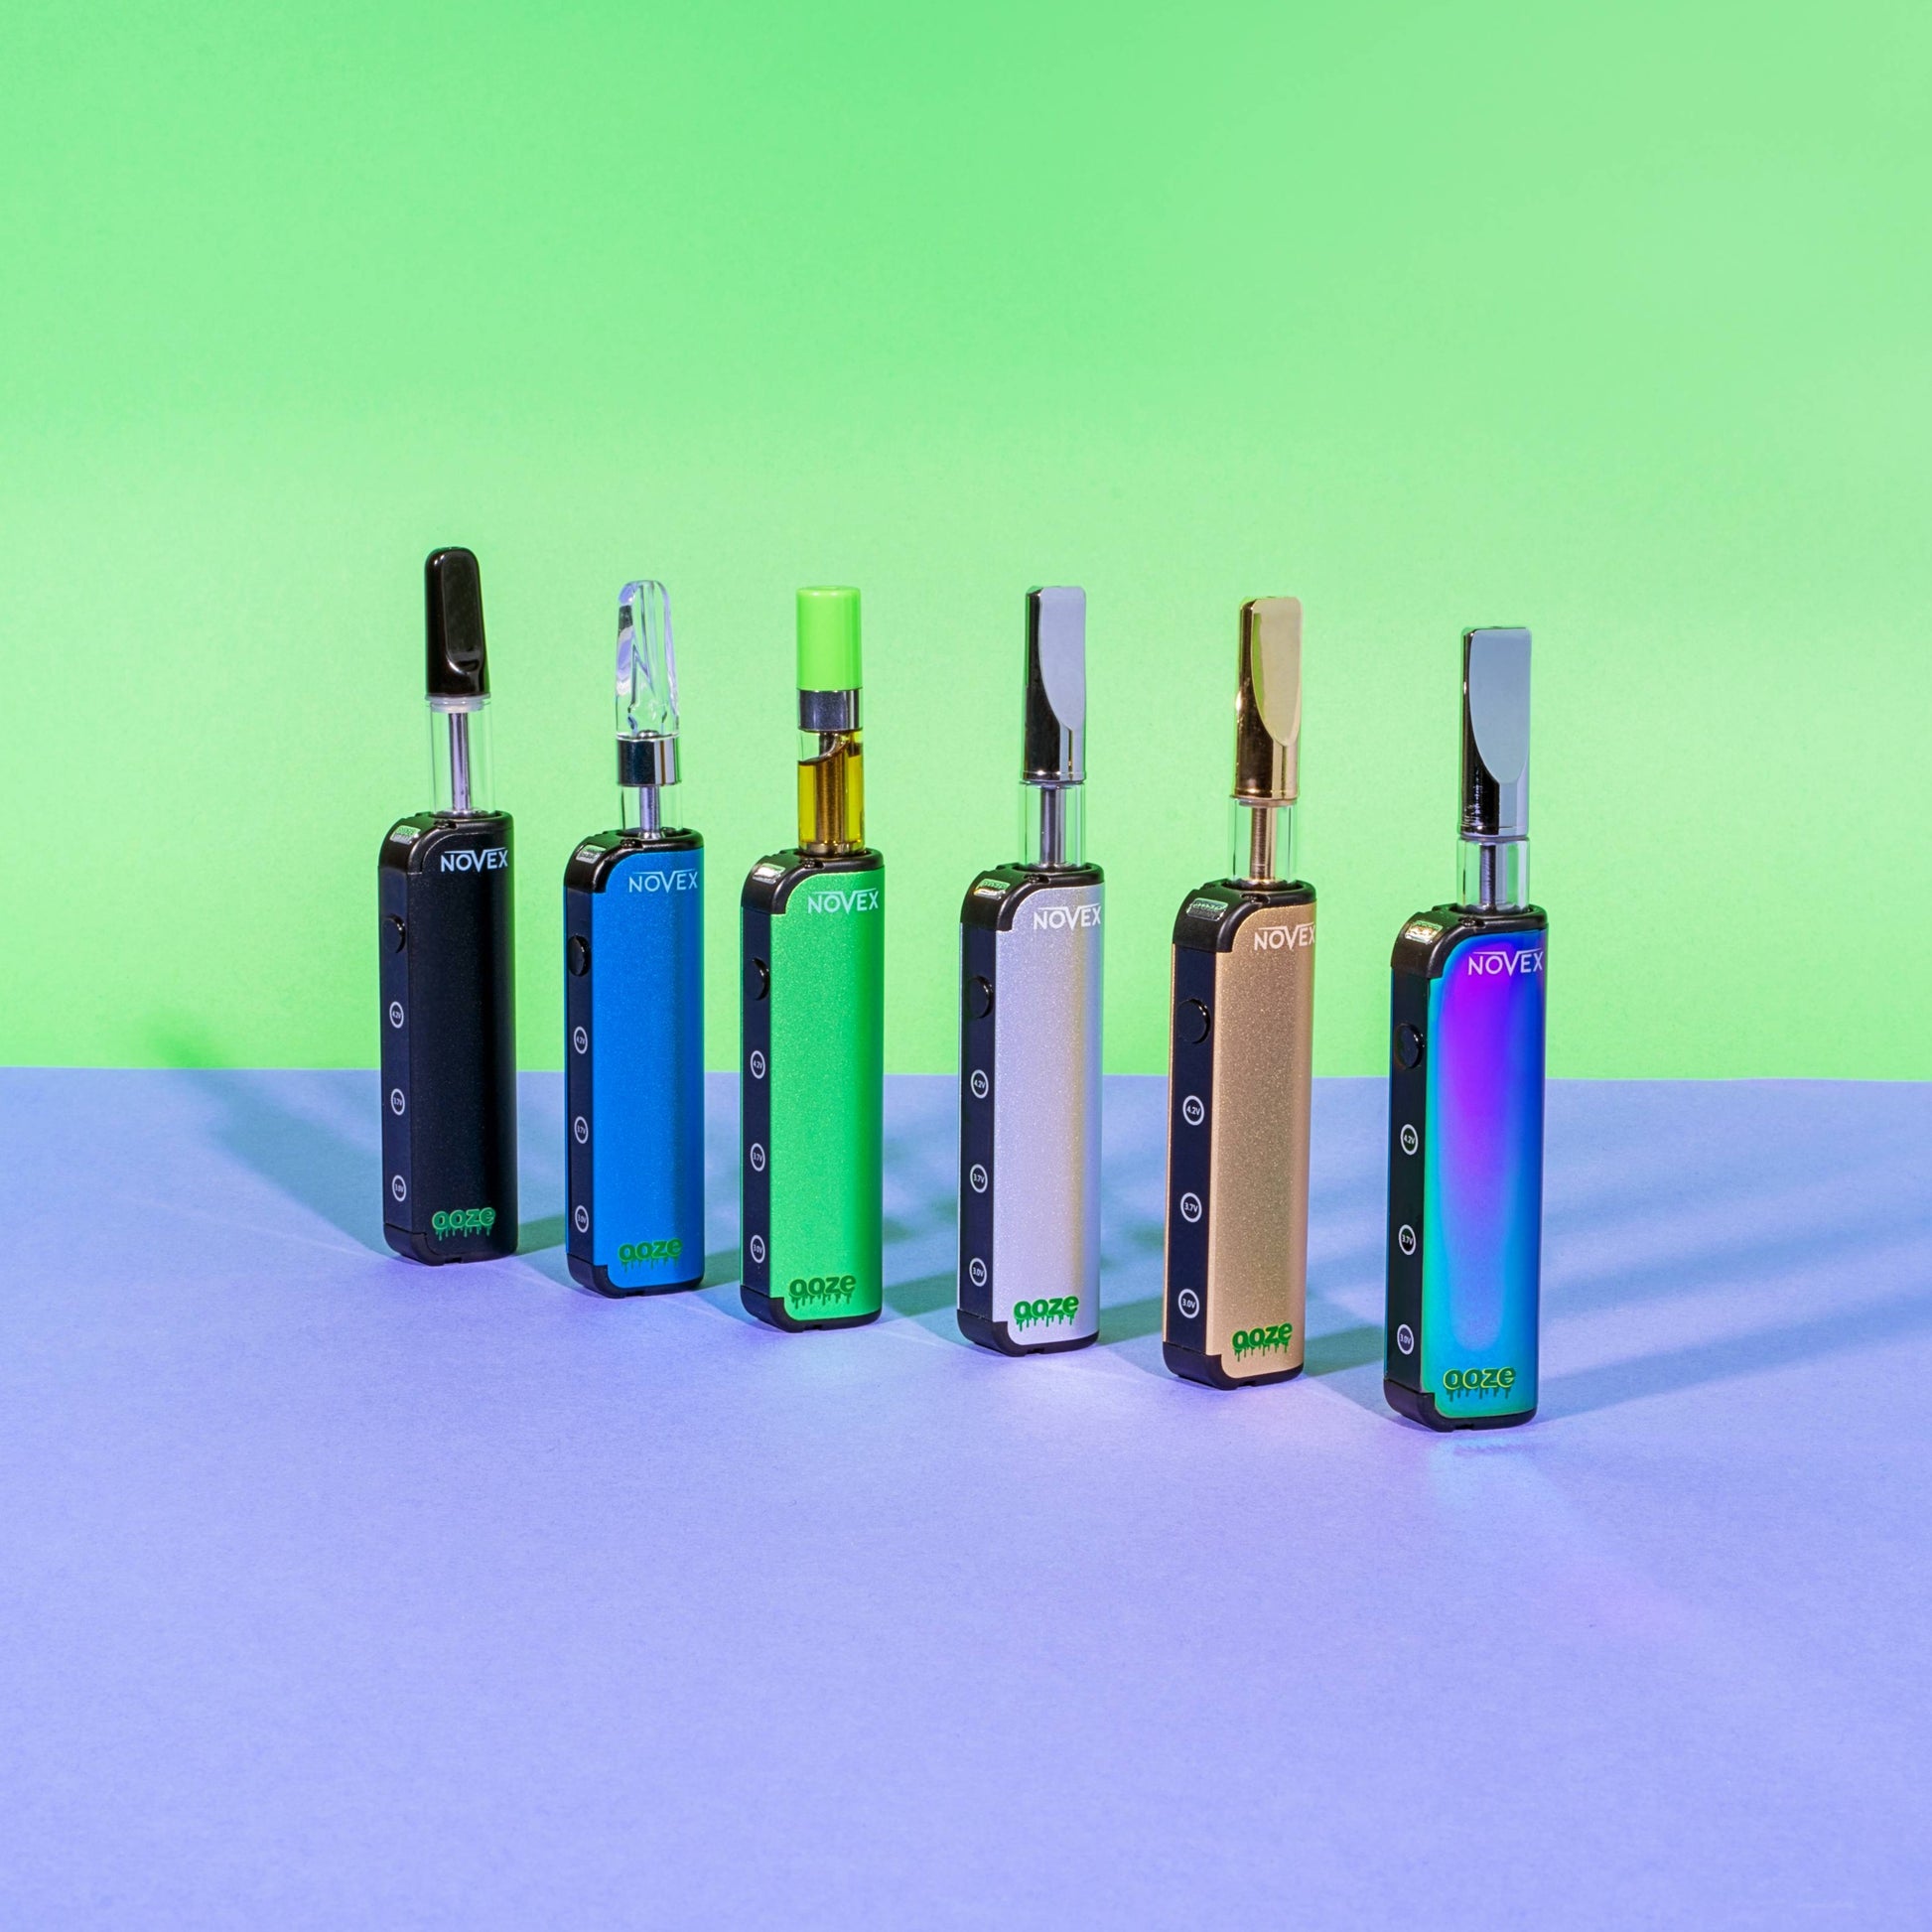 All 6 colors of the Ooze Novex battery are lined up, each has a 510 cartridge inserted